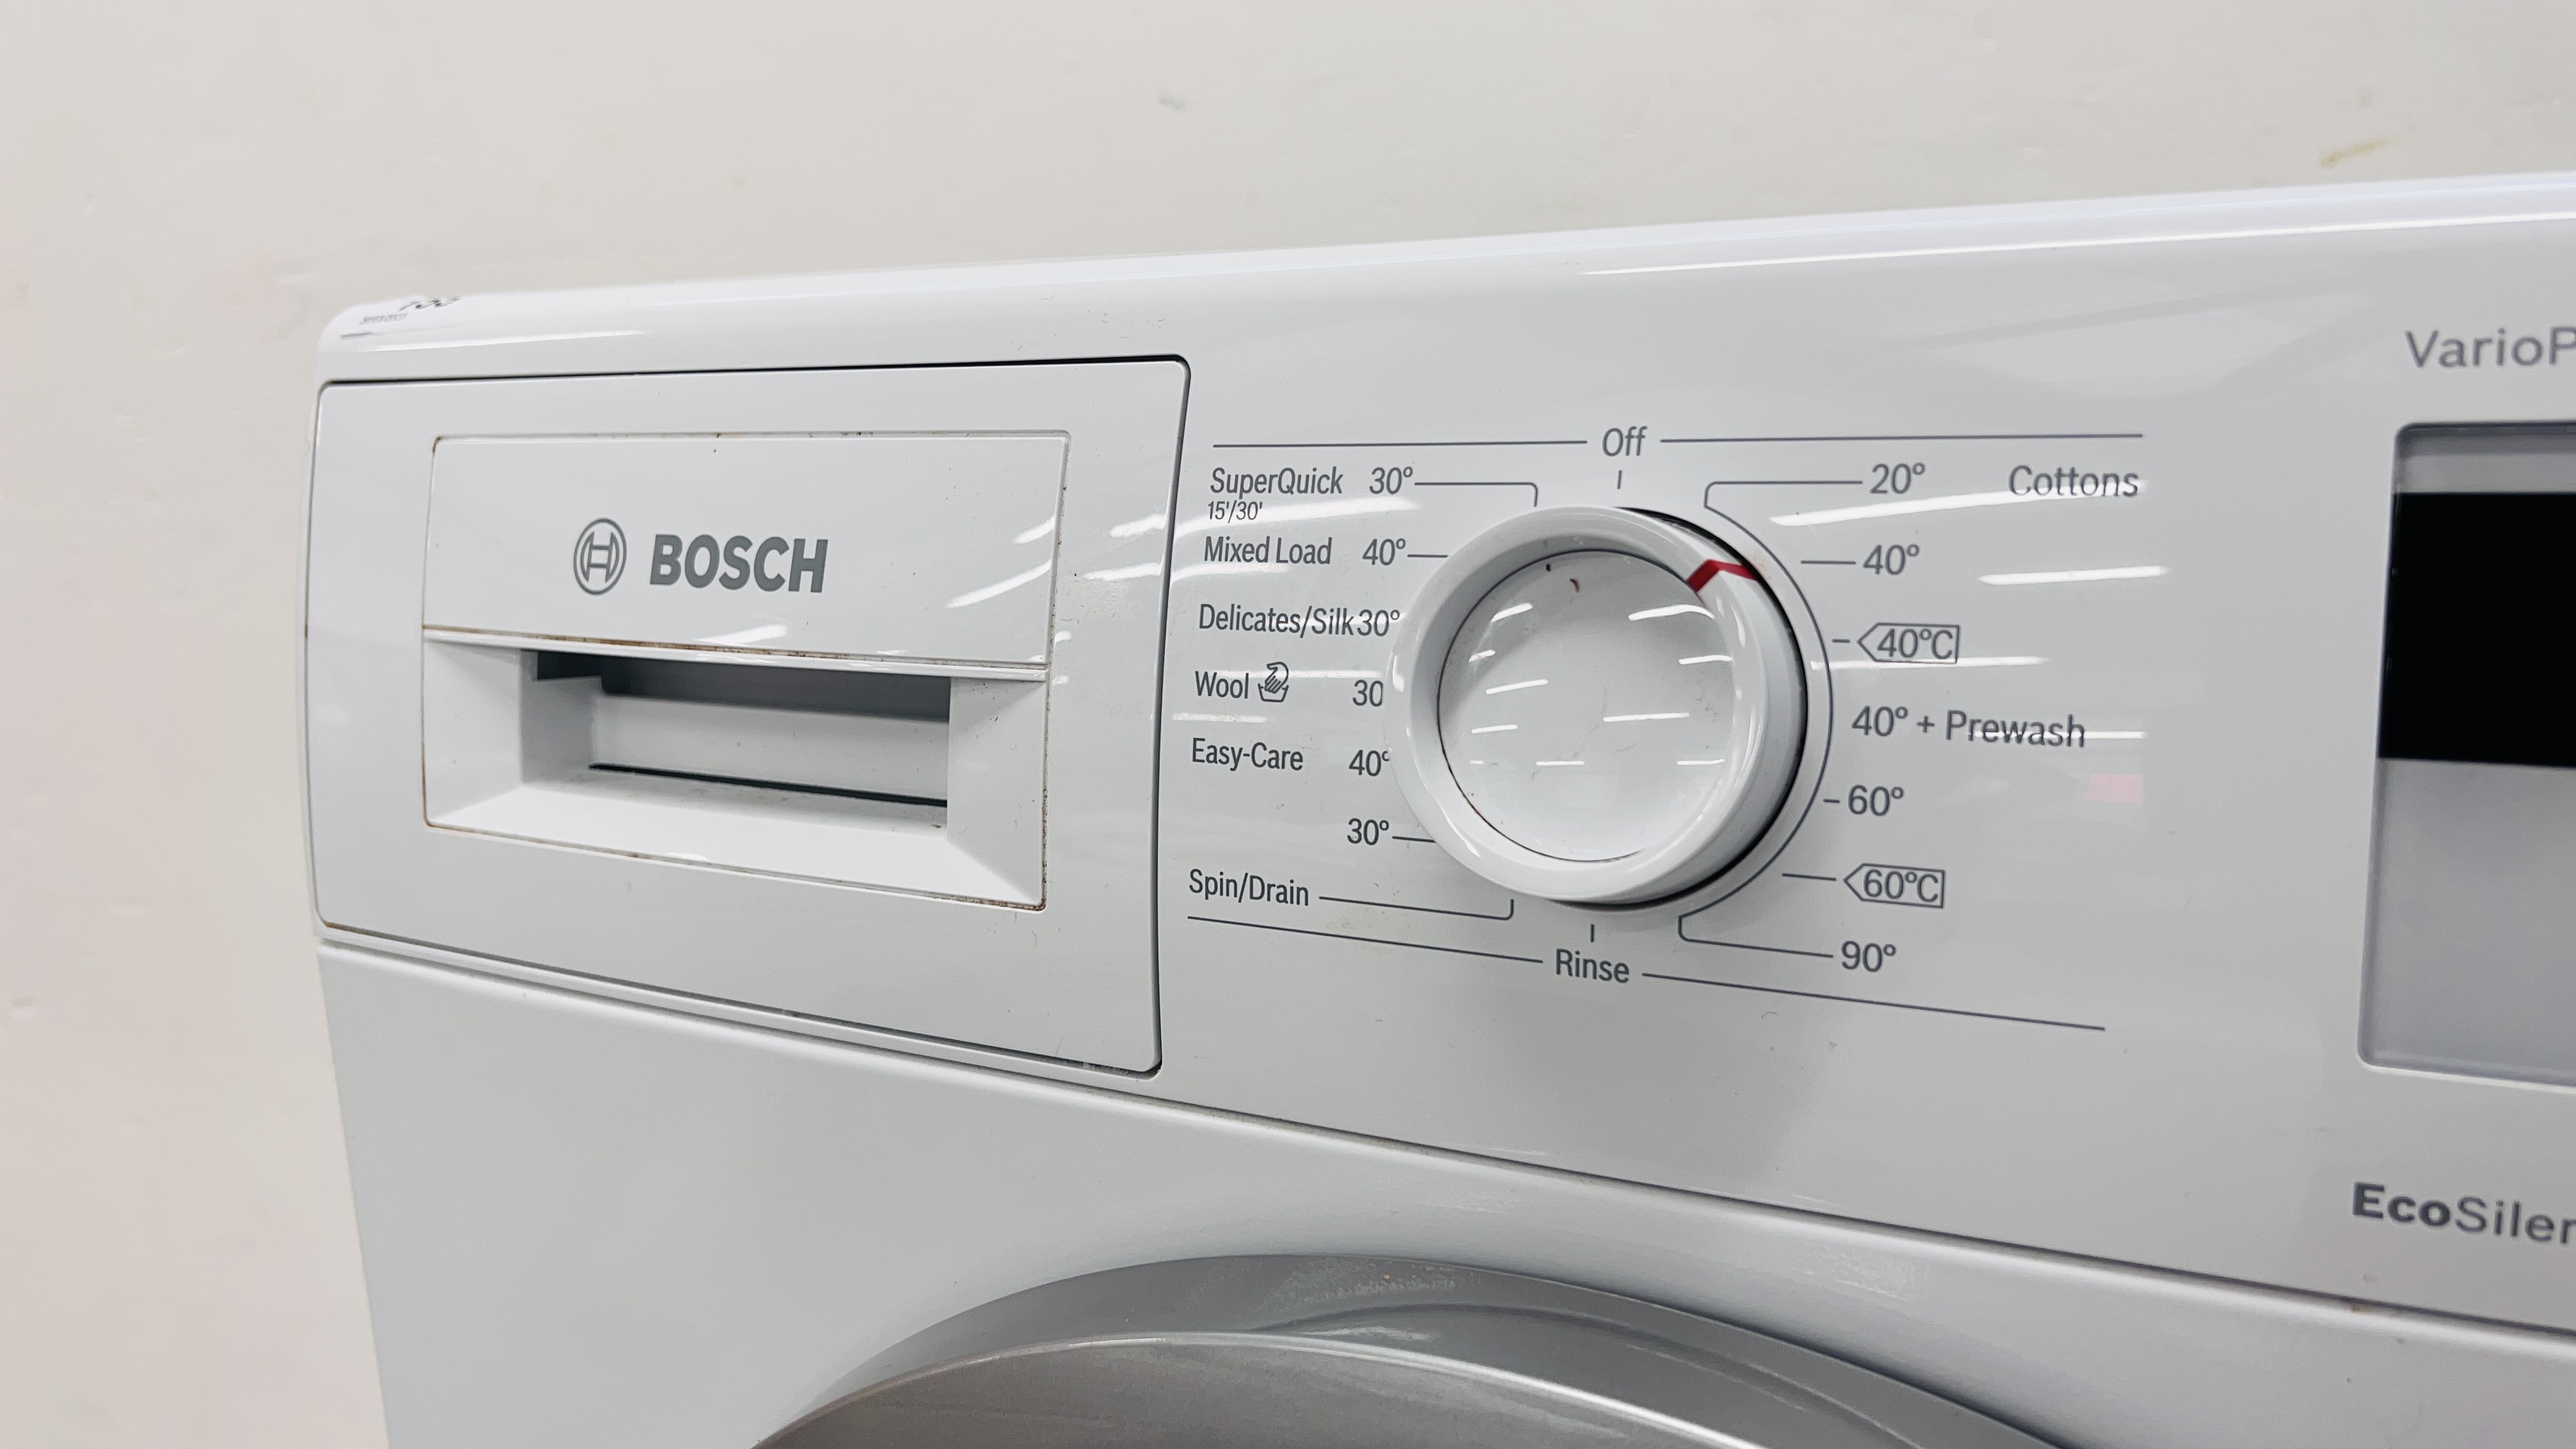 BOSCH VARIO PERFECT SERIE/4 WASHING MACHINE - SOLD AS SEEN - Image 3 of 9